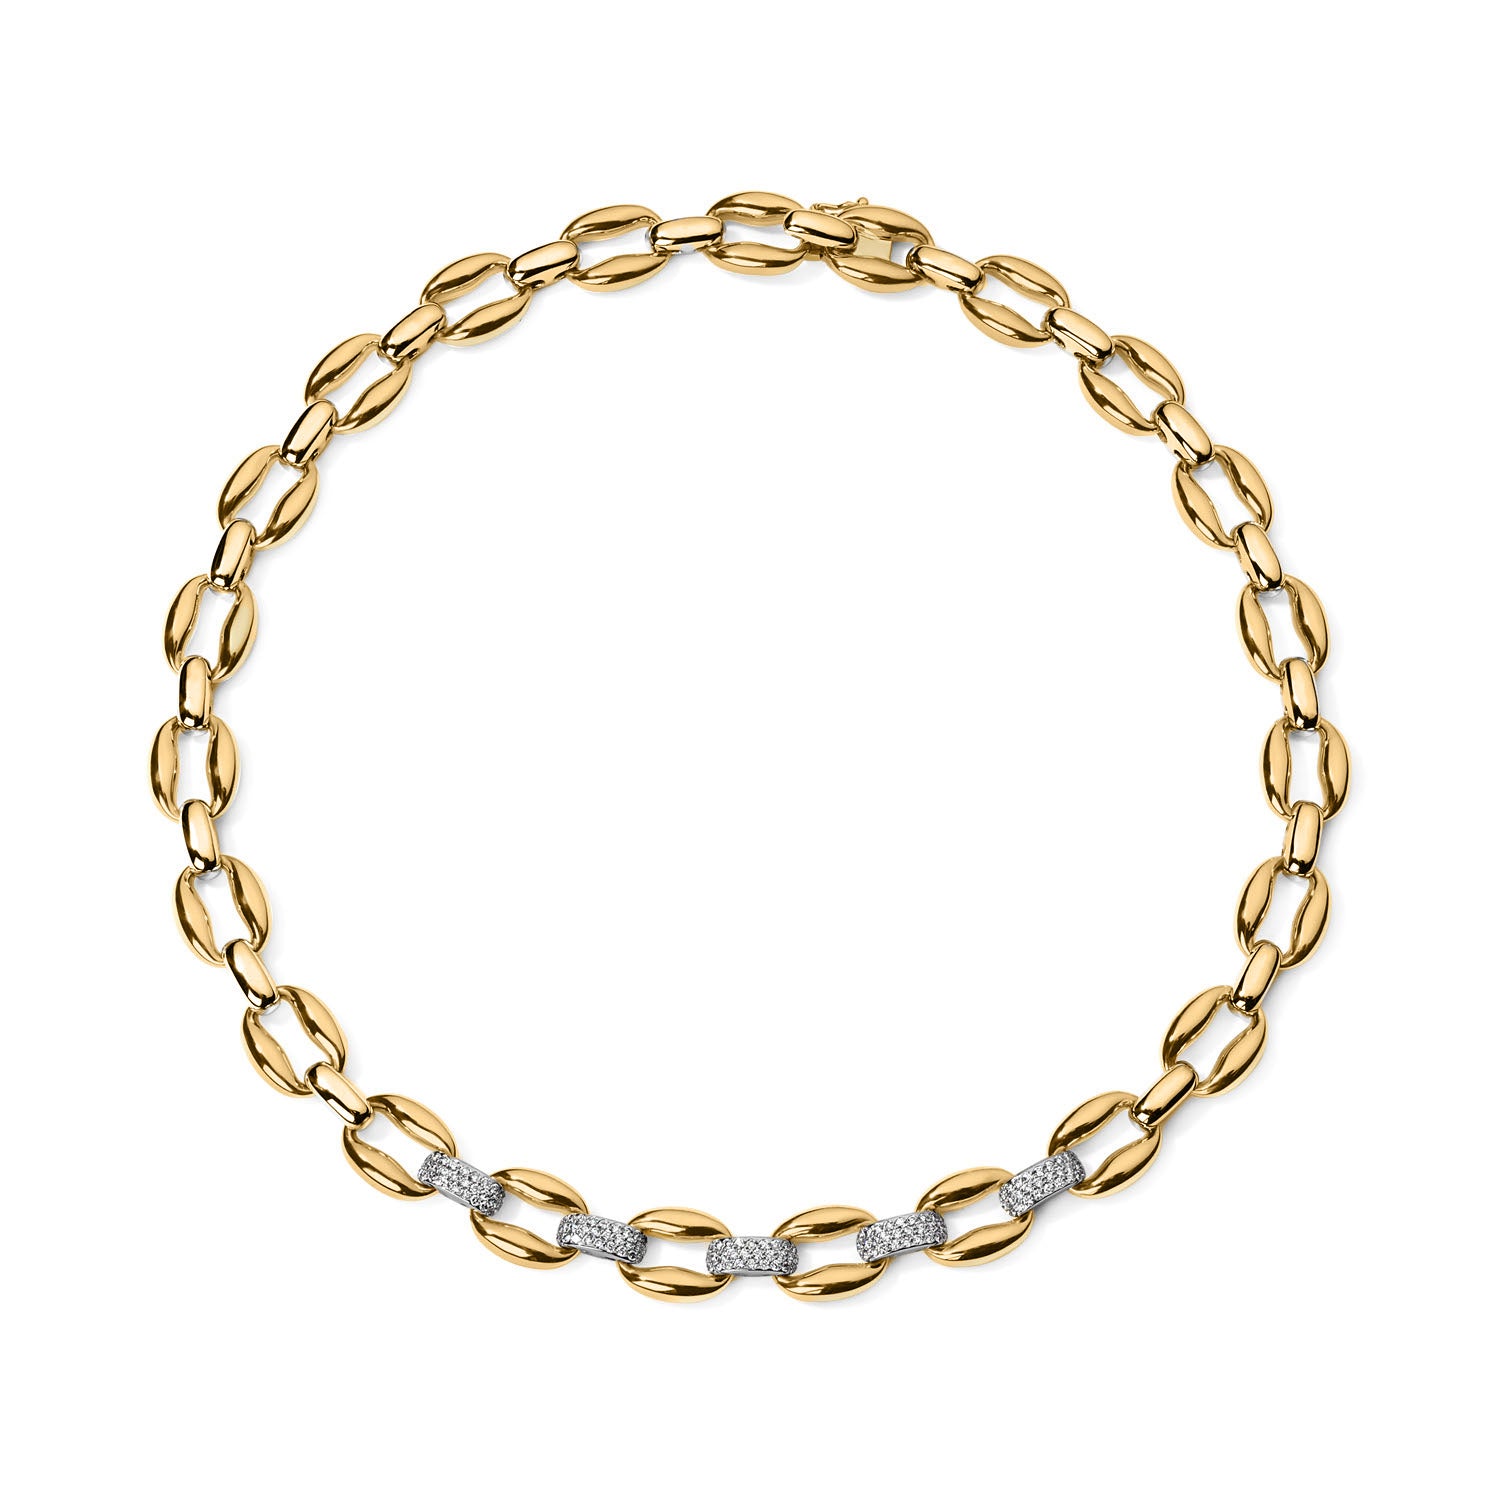 Gold and Pave Oval Link Necklace with 5 Pave Sections